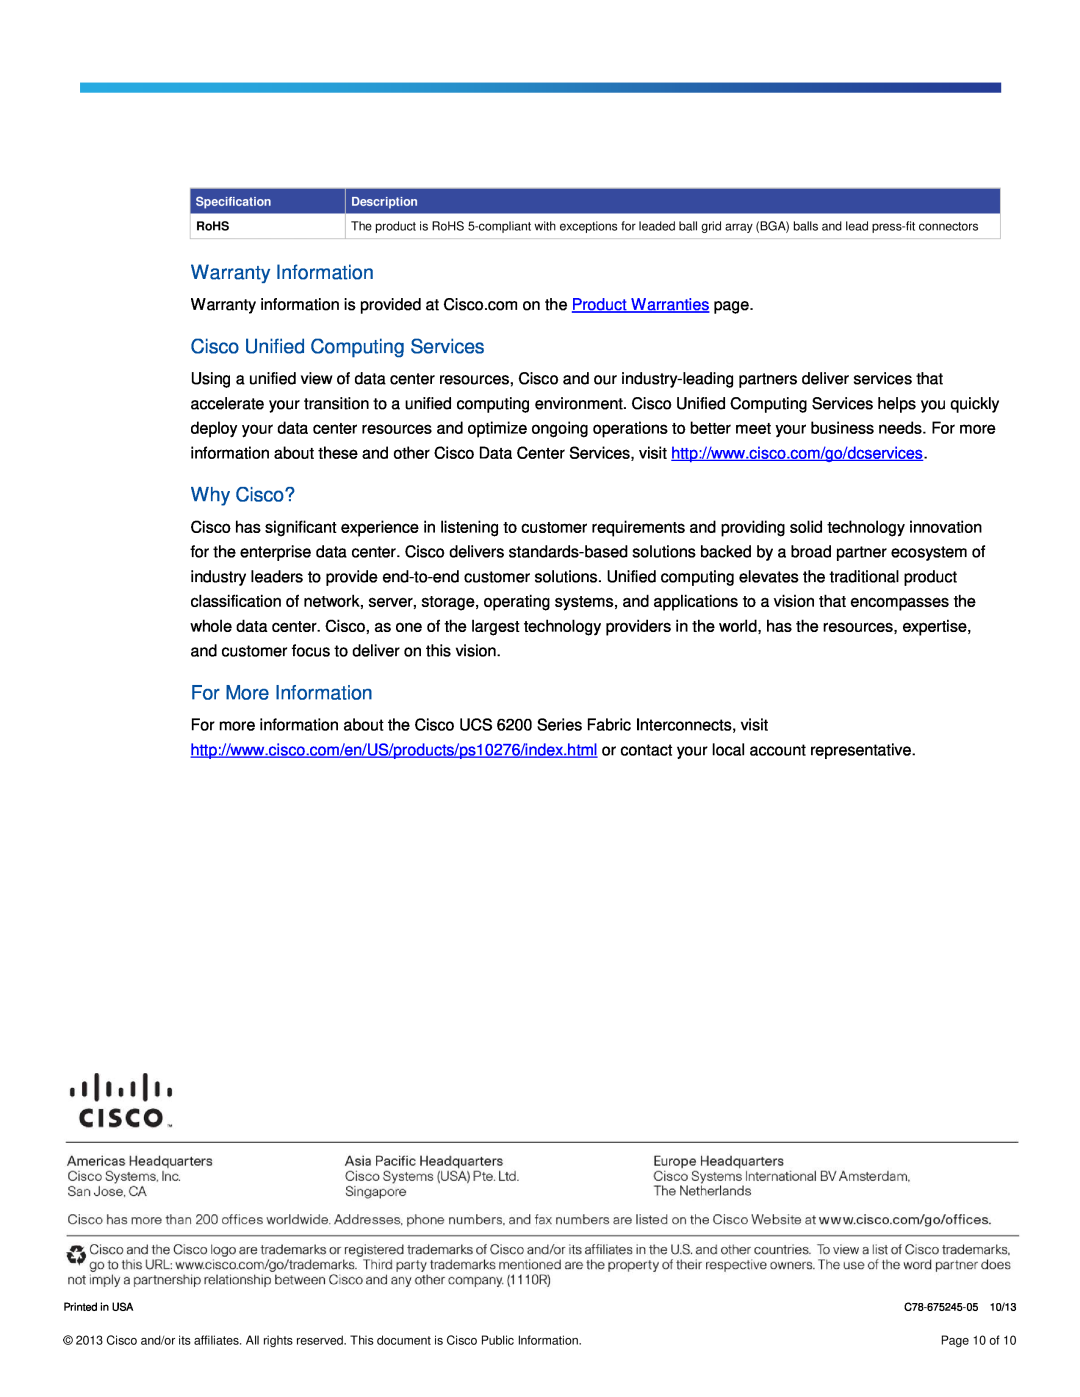 Cisco Systems UCSFI6248E1628P Warranty Information, Cisco Unified Computing Services, Why Cisco?, For More Information 